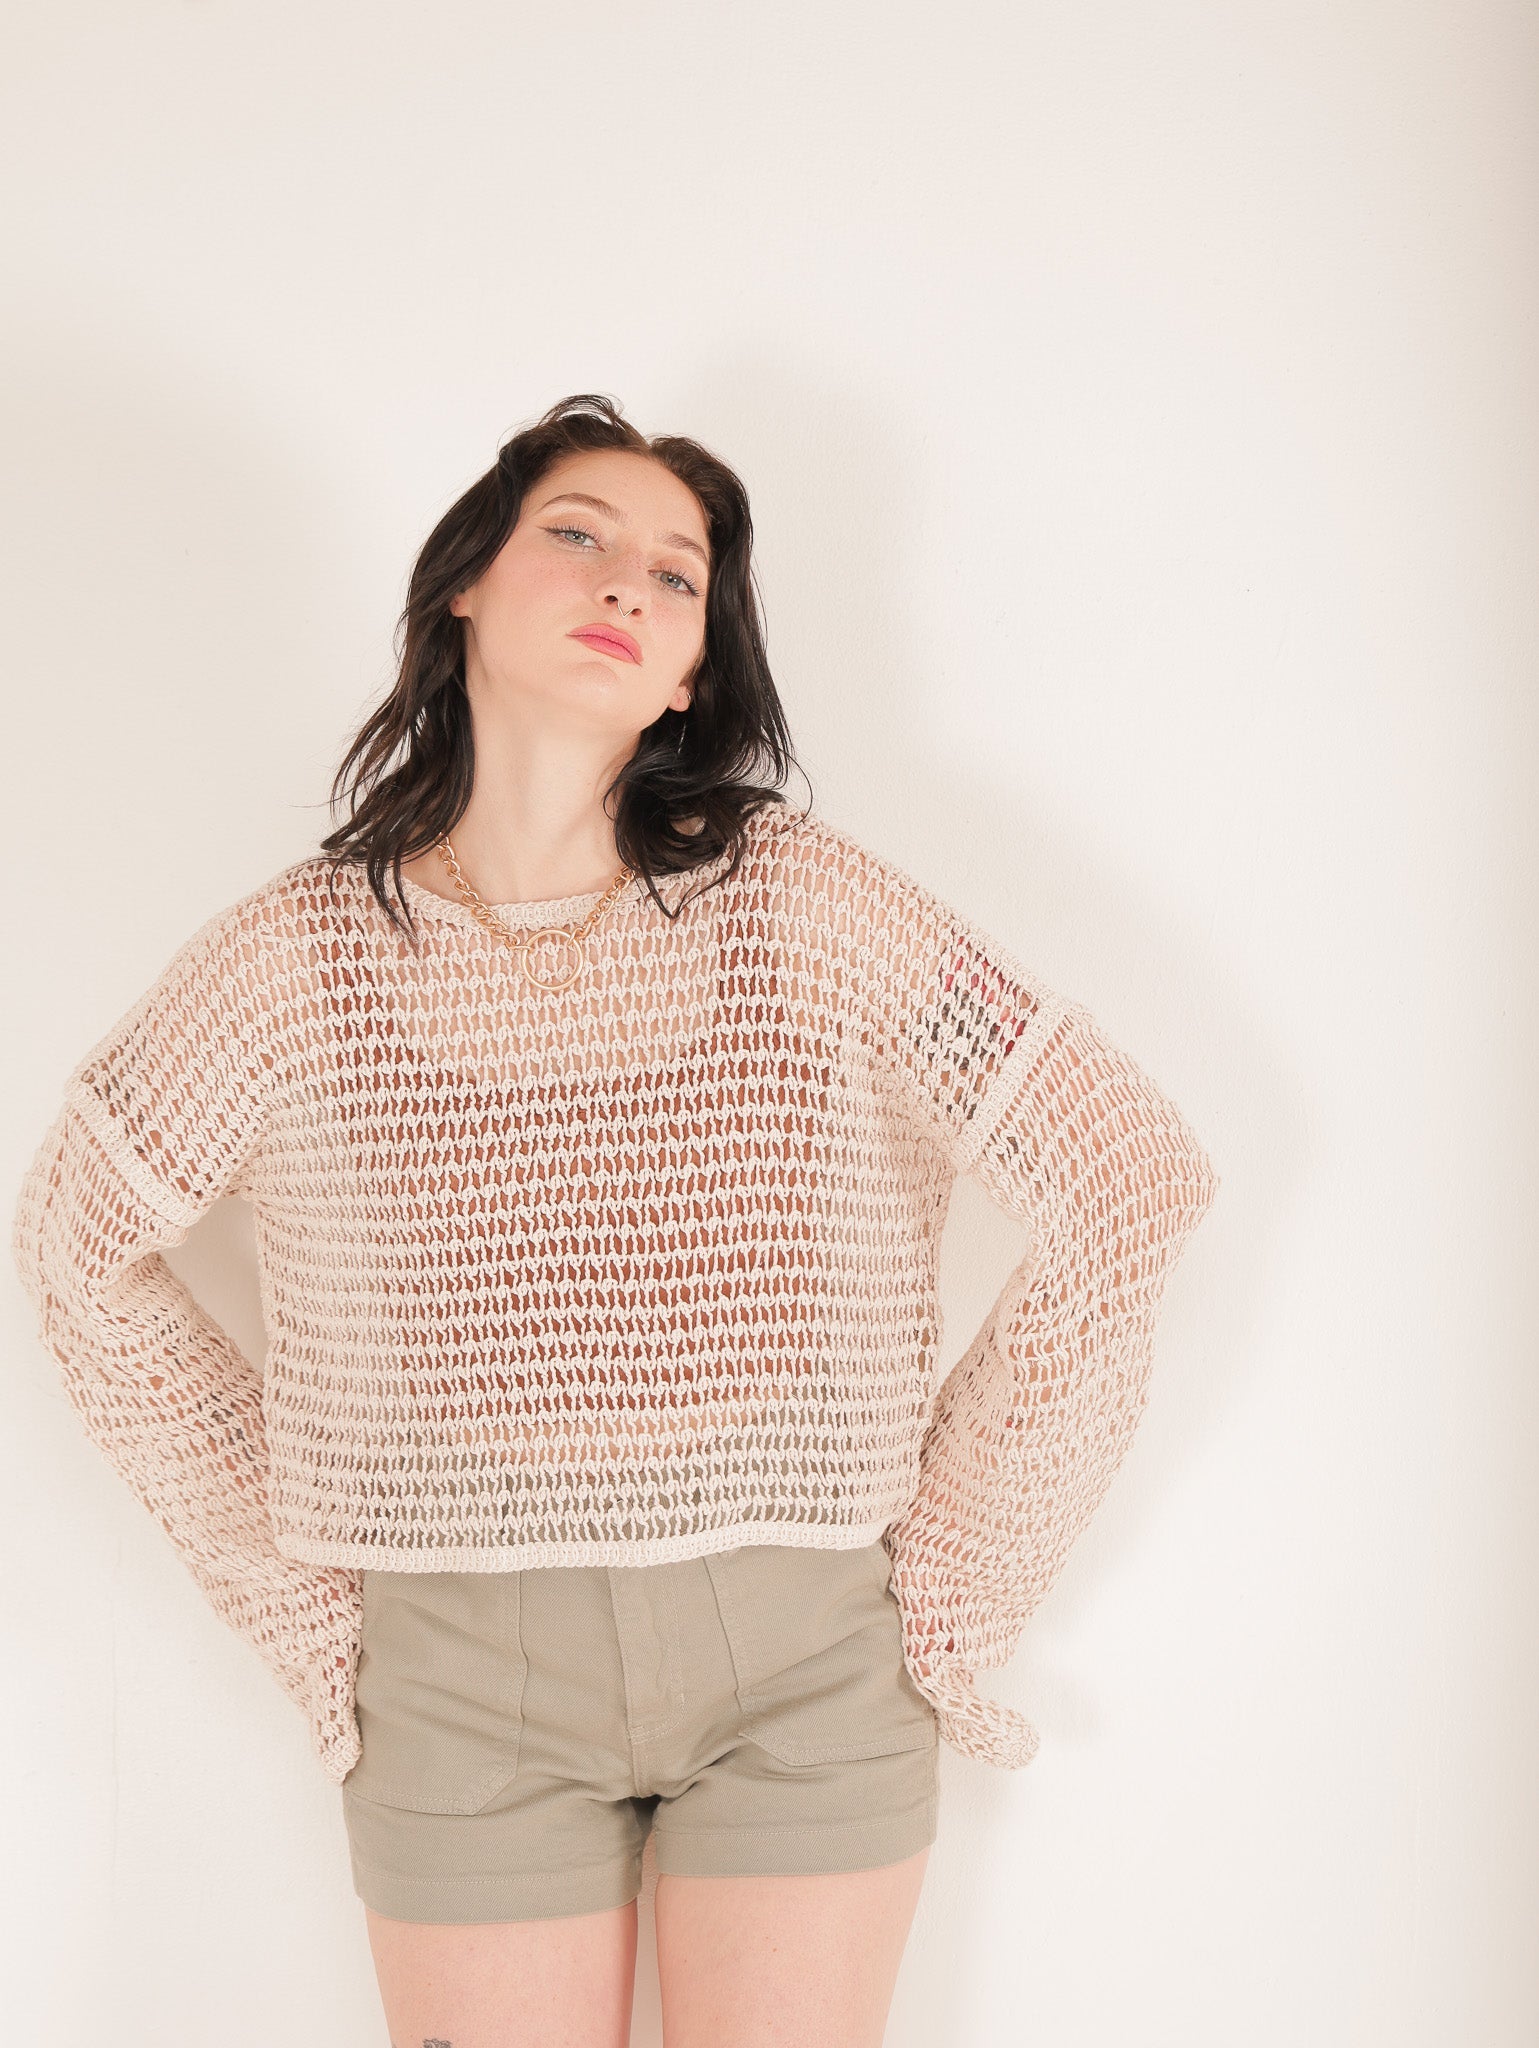 Molly Green - Dixie Knit Sweater - Sweaters_Cardigans